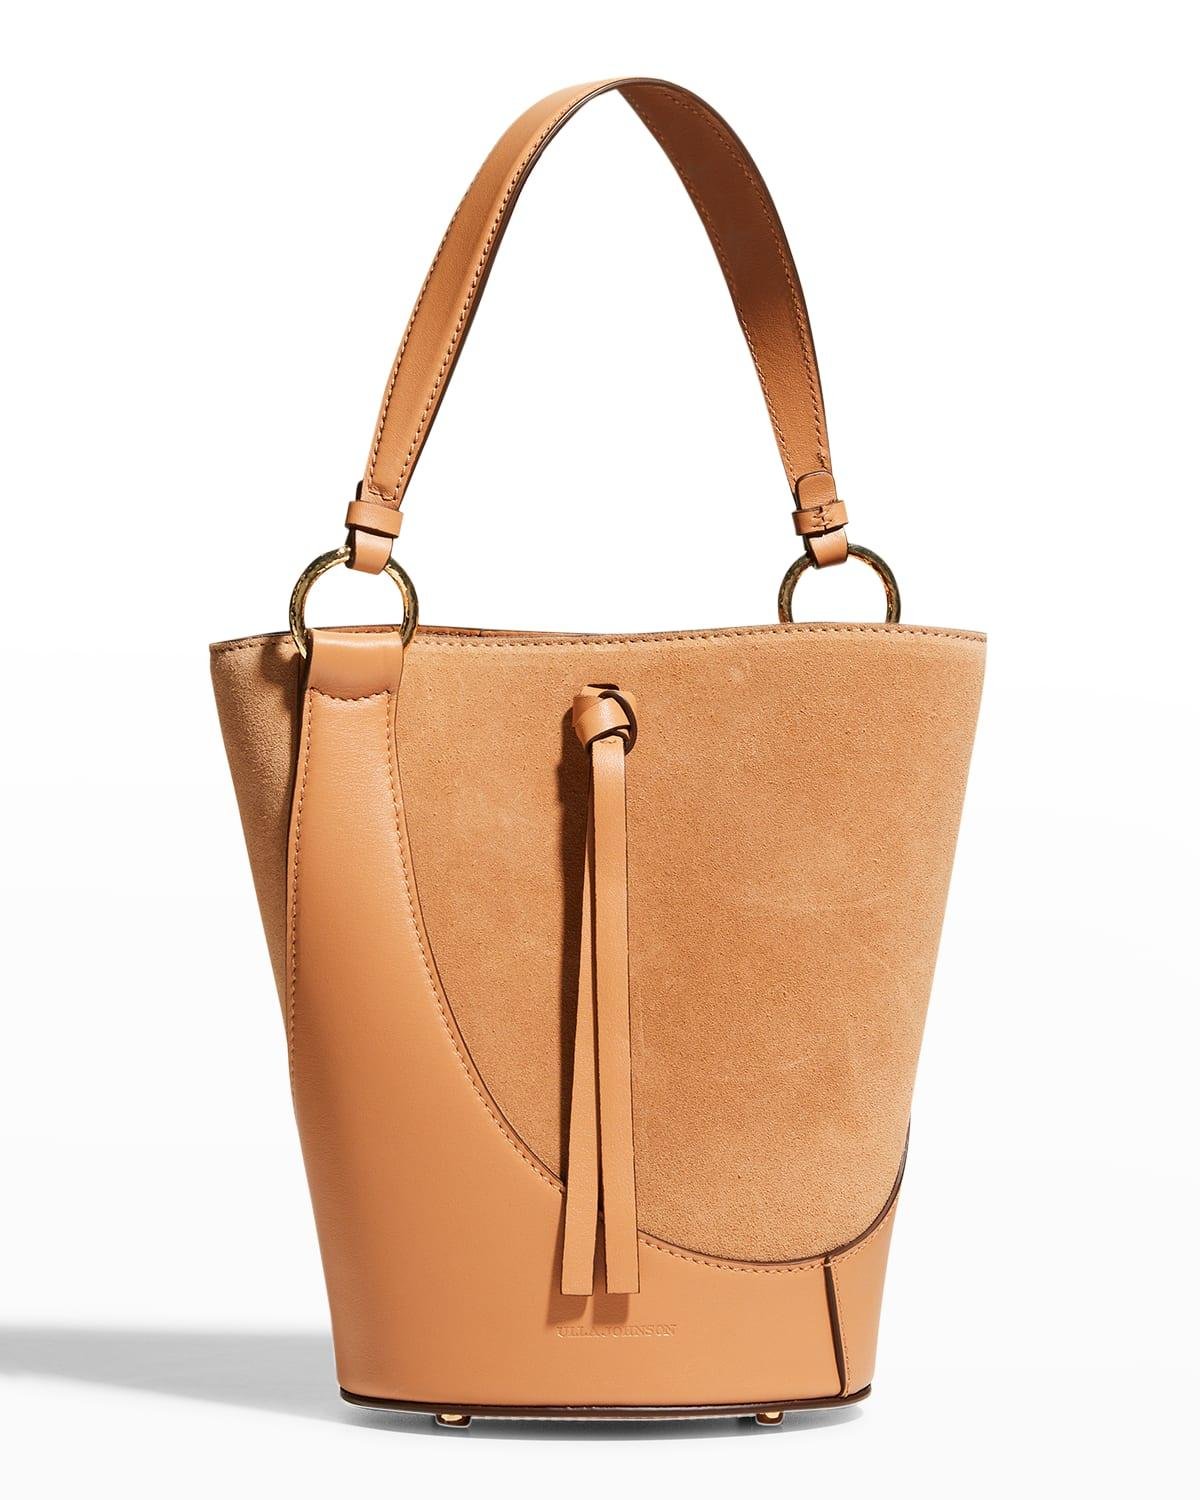 Esme Mixed Leather Small Bucket Tote Bag by ULLA JOHNSON